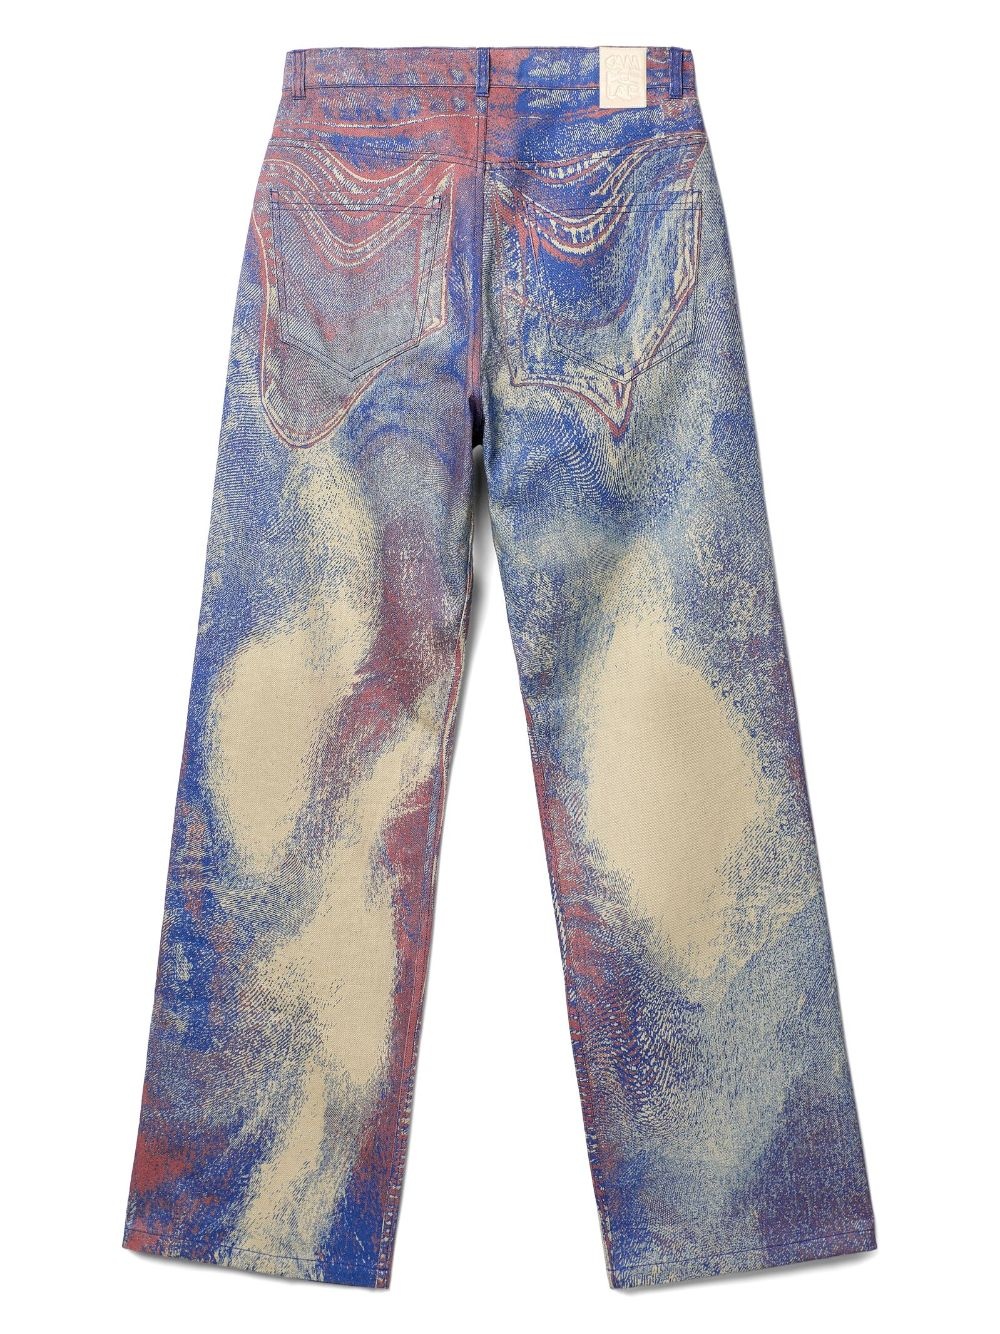 abstract-pattern jeans - 7